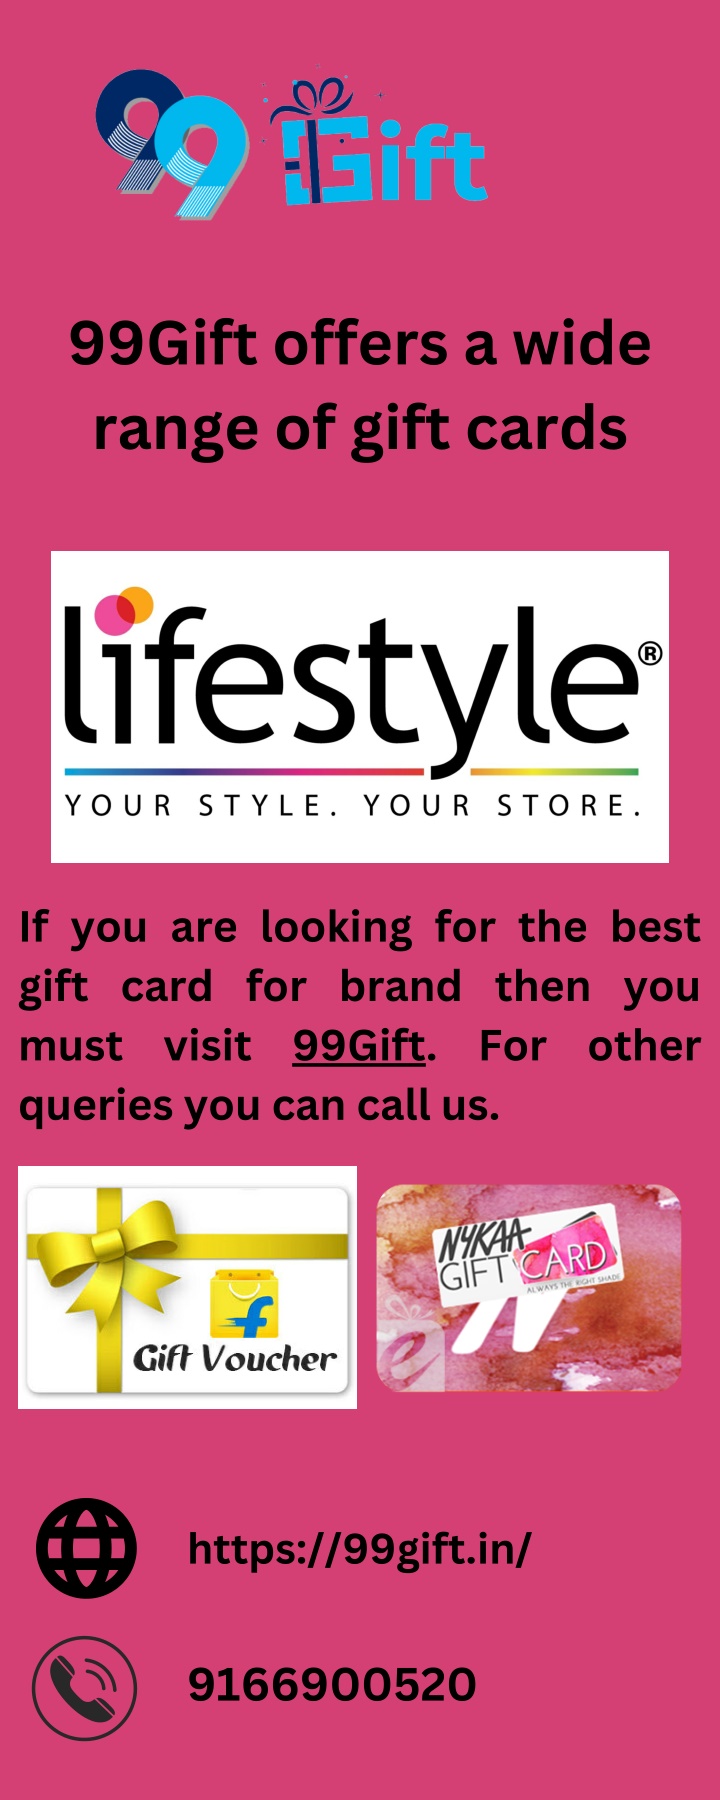 99gift offers a wide range of gift cards